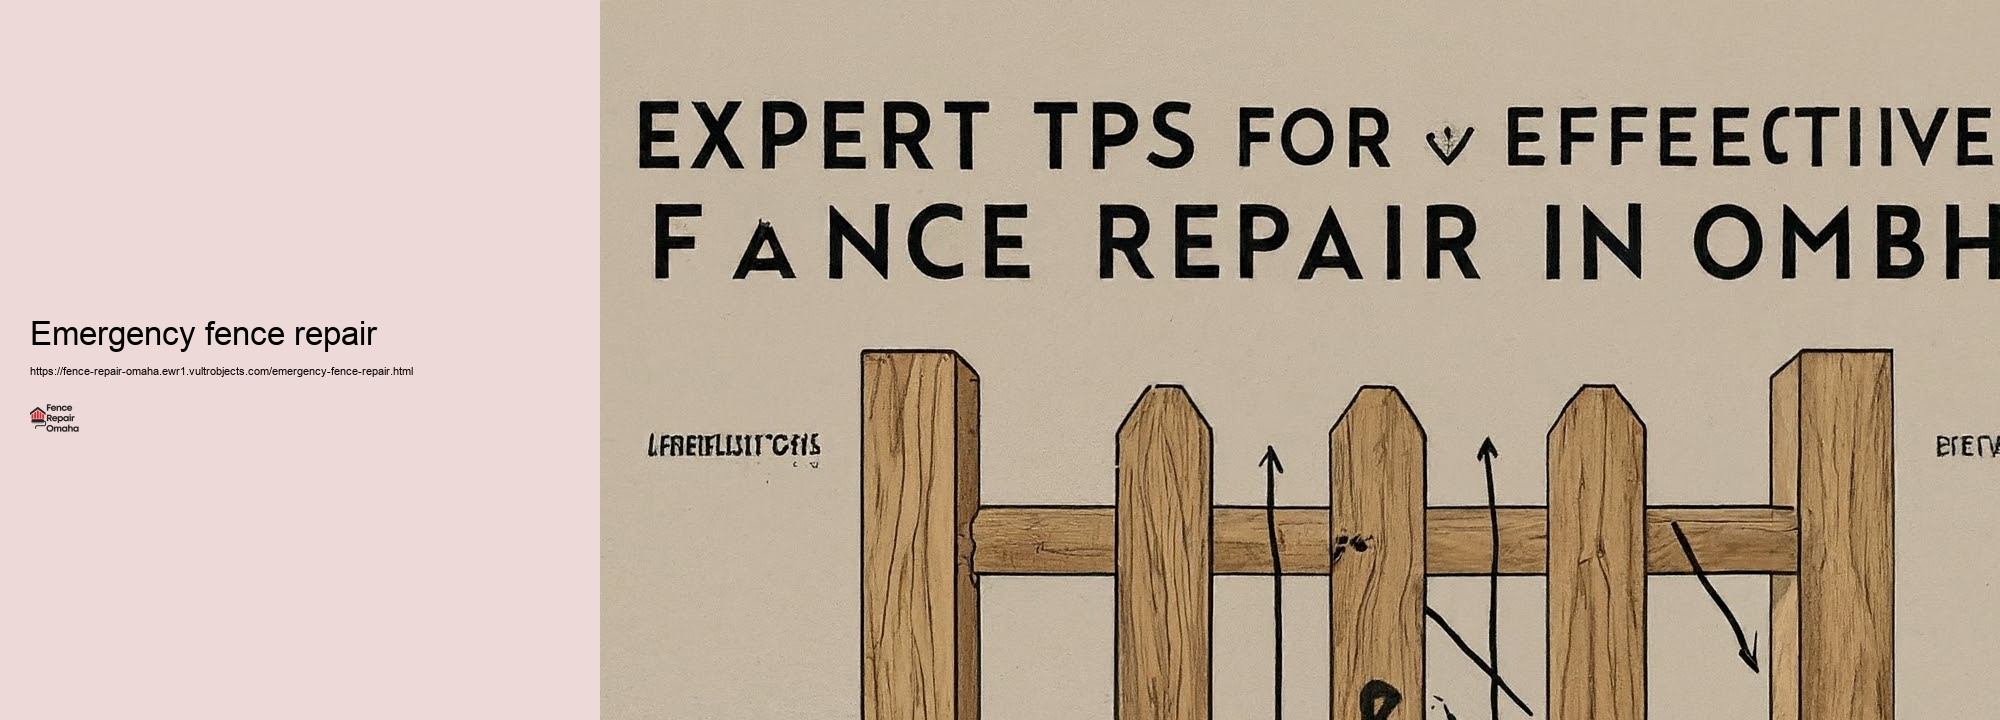 Specialist Tips for Trustworthy Fence Fixing Service in Omaha